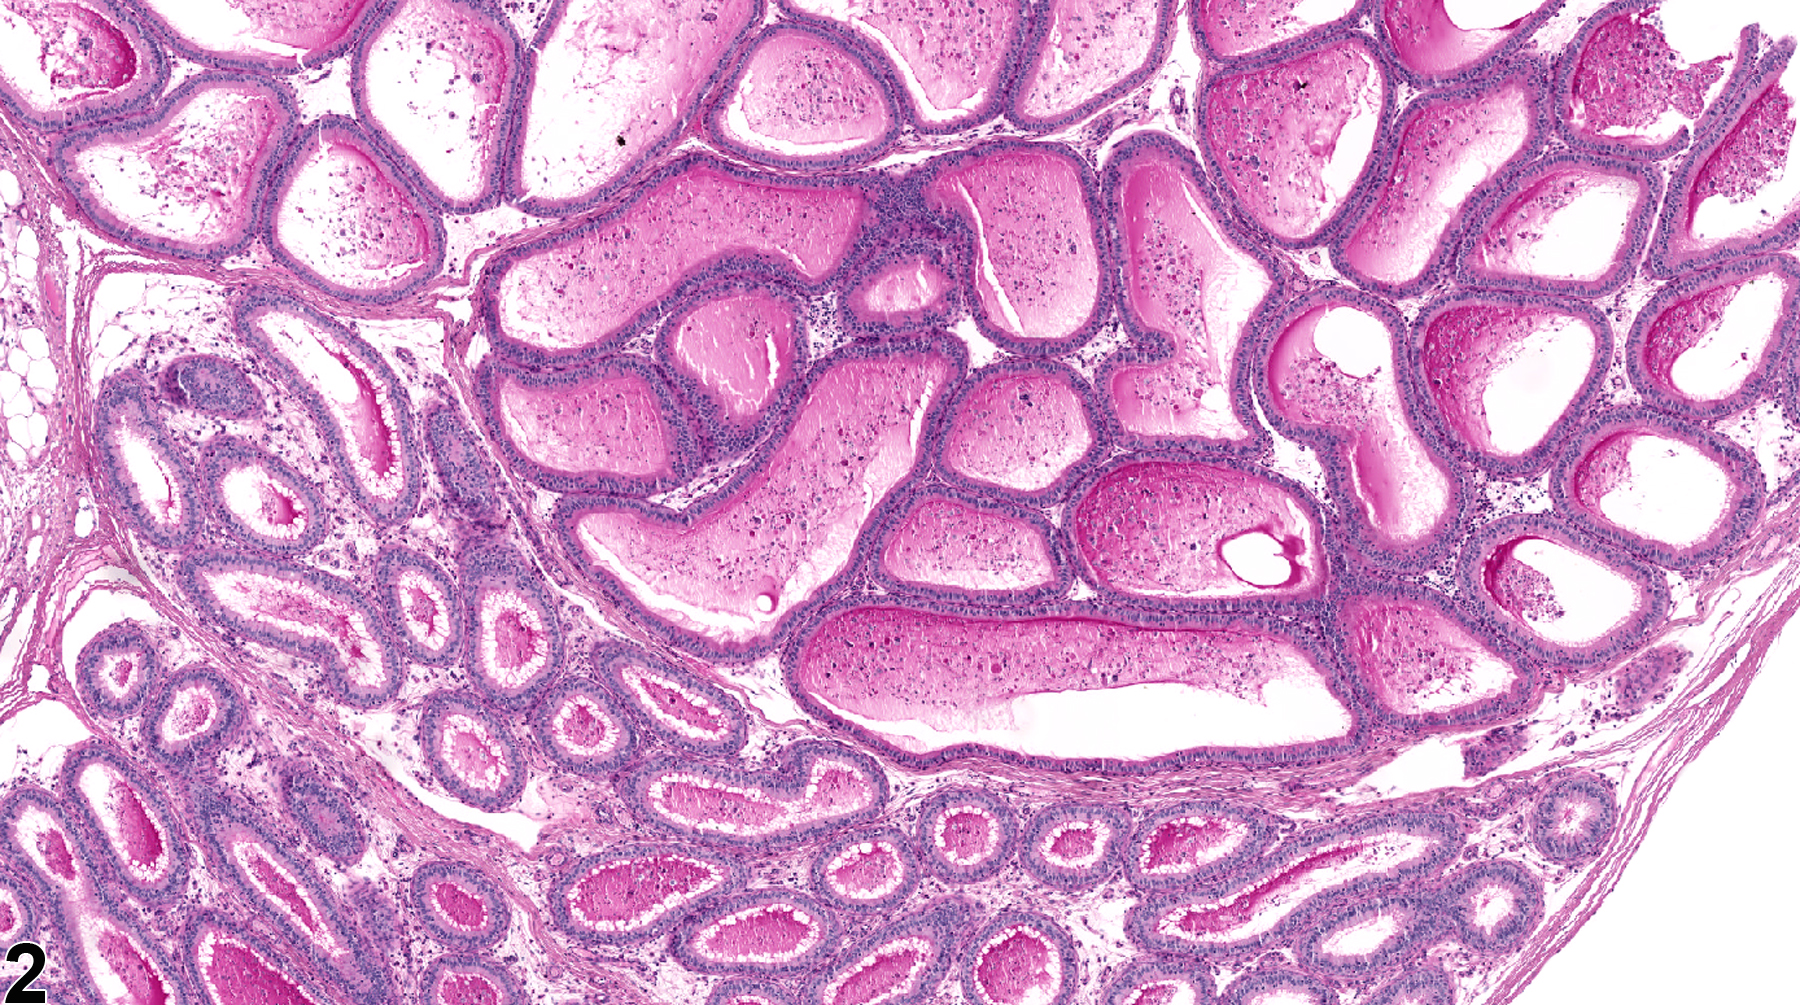 Image of duct dilation in the epididymis from a  rat